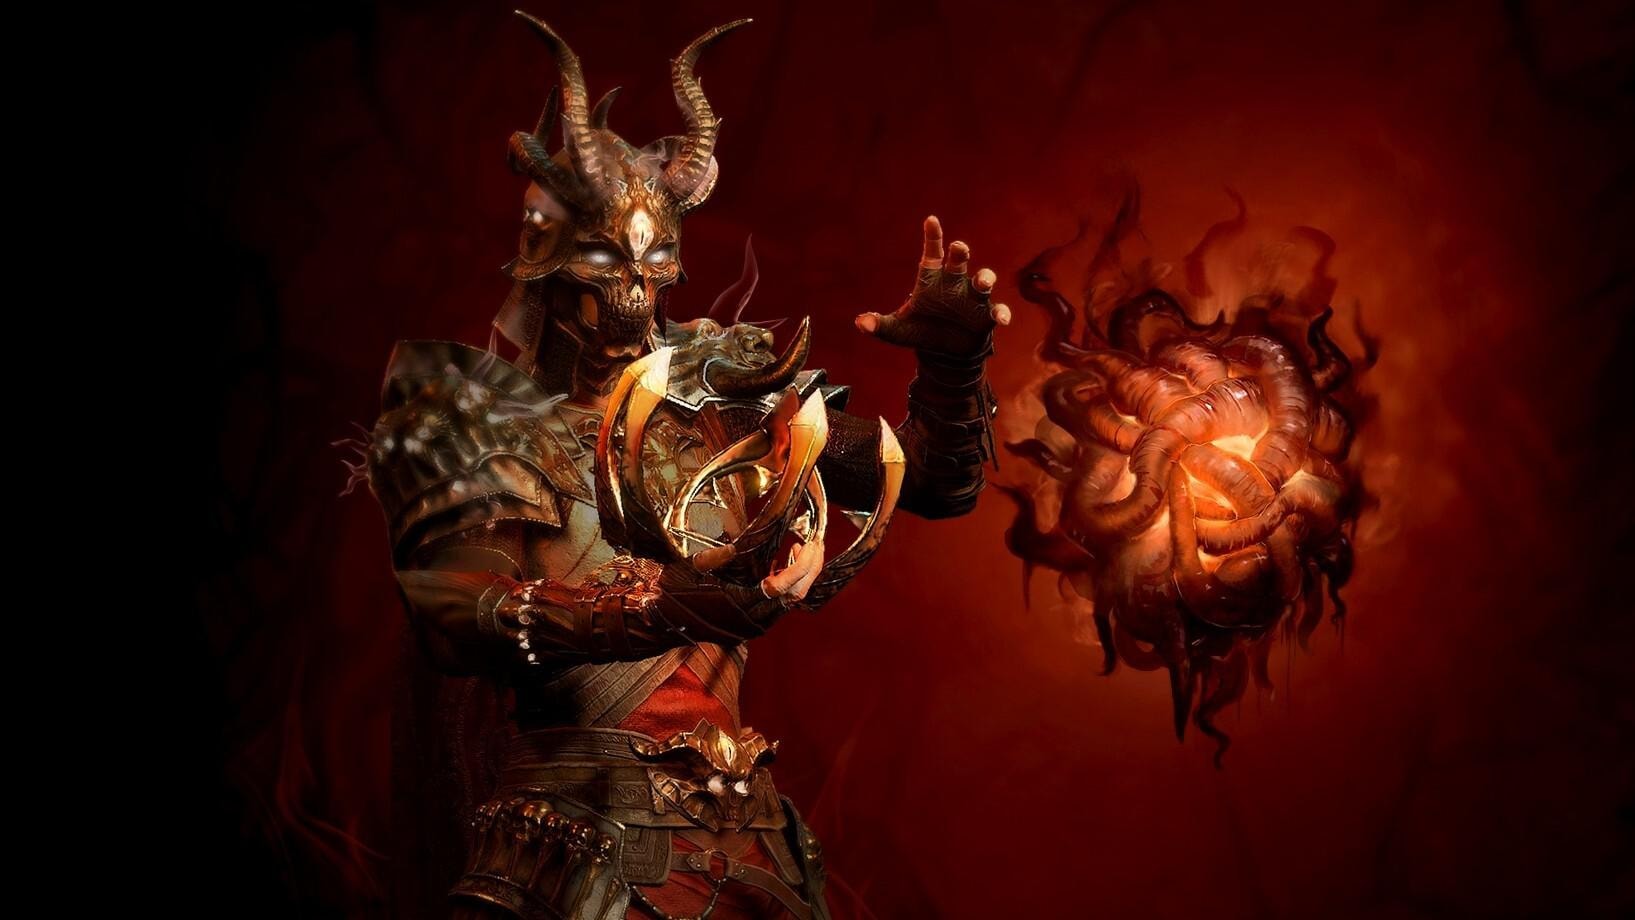 diablo-4-update-brings-back-season-1s-best-malignant-powers-in-a-new-form-full-patch-notes